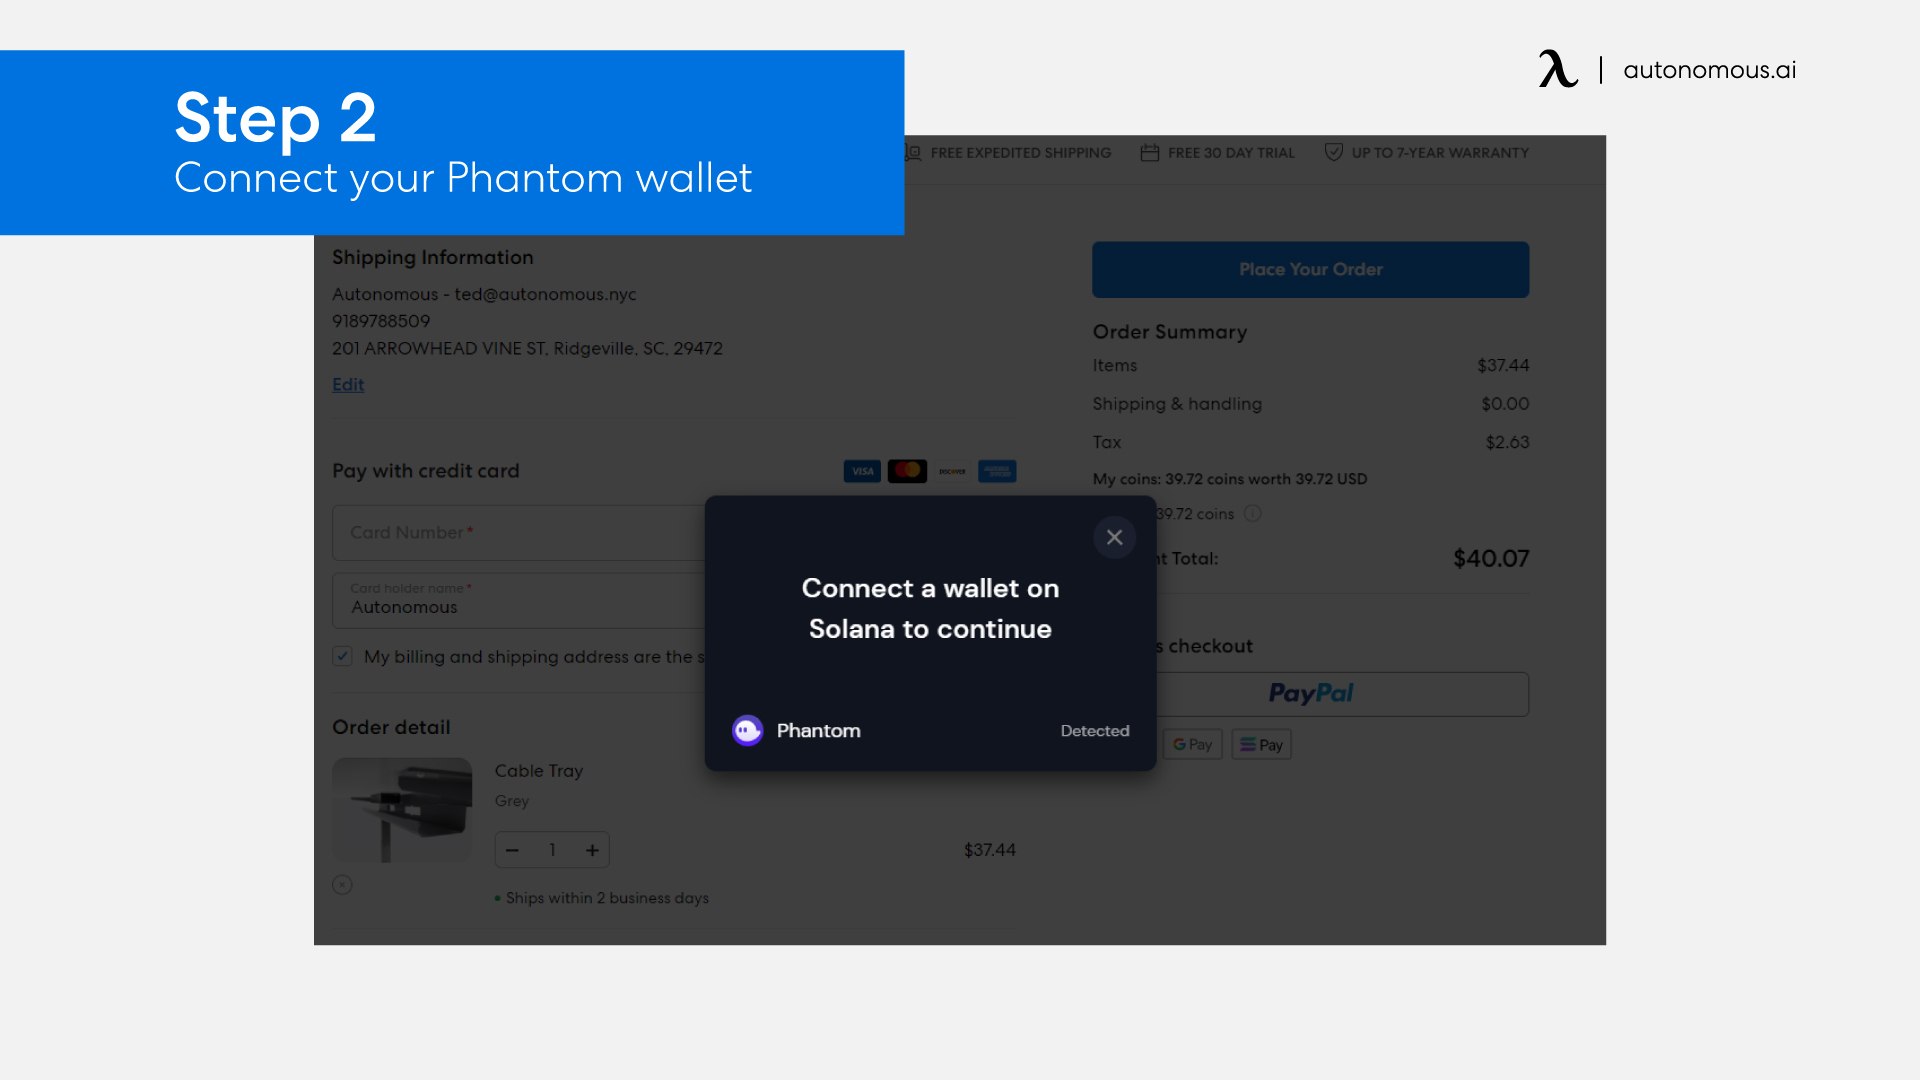 Connect your Phantom wallet